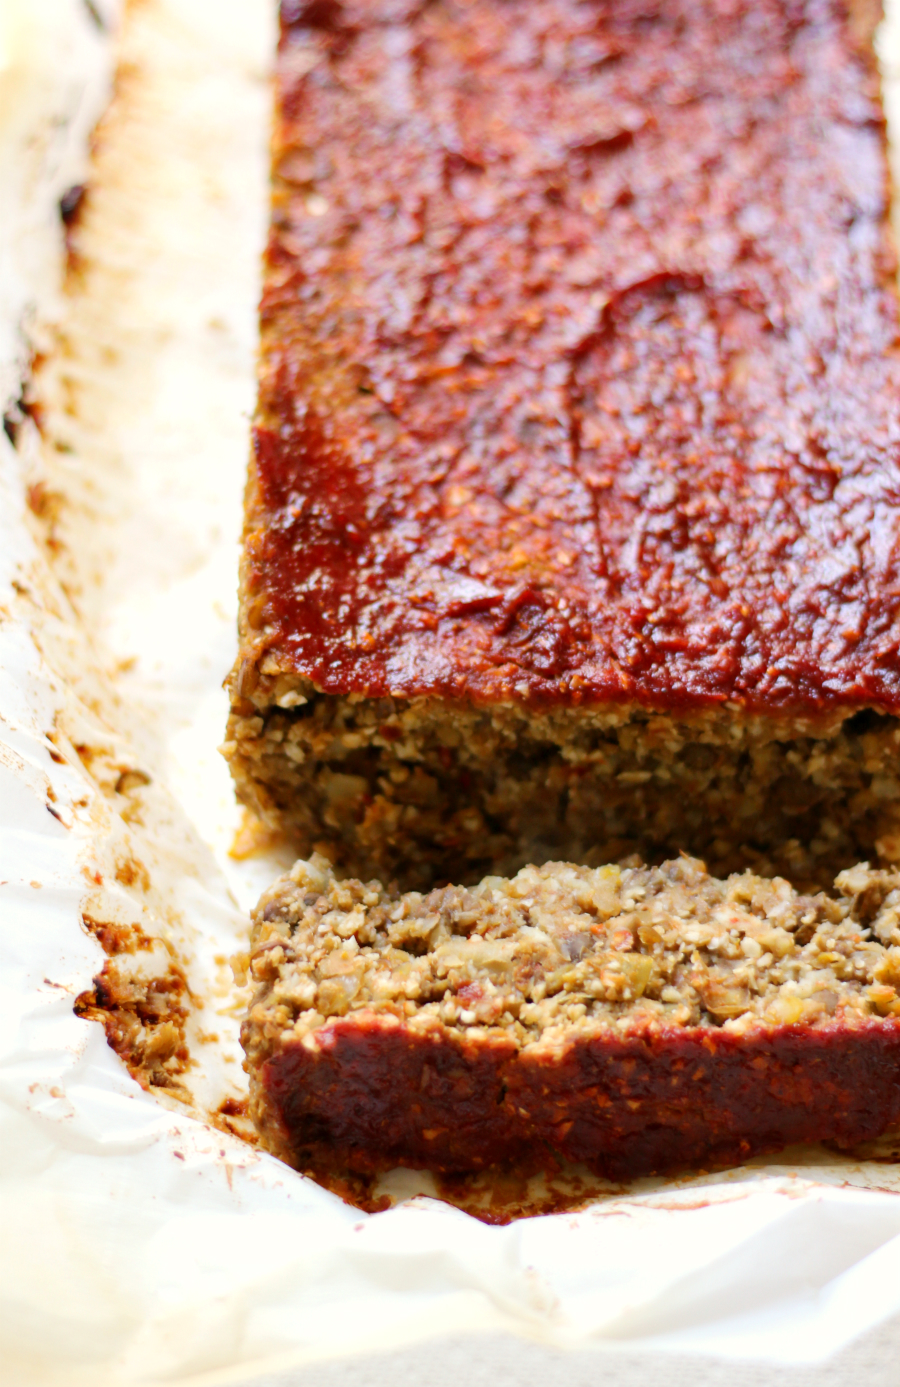 Vegan Cauliflower Lentil Loaf | Strength and Sunshine @RebeccaGF666 A hearty plant-based dinner idea that will satisfy even meat-eaters! A Vegan Cauliflower Lentil Loaf that mimics the classic meatloaf with no meat, gluten-free, nut-free, and soy-free! Get all your protein and veggies in this healthy recipe!